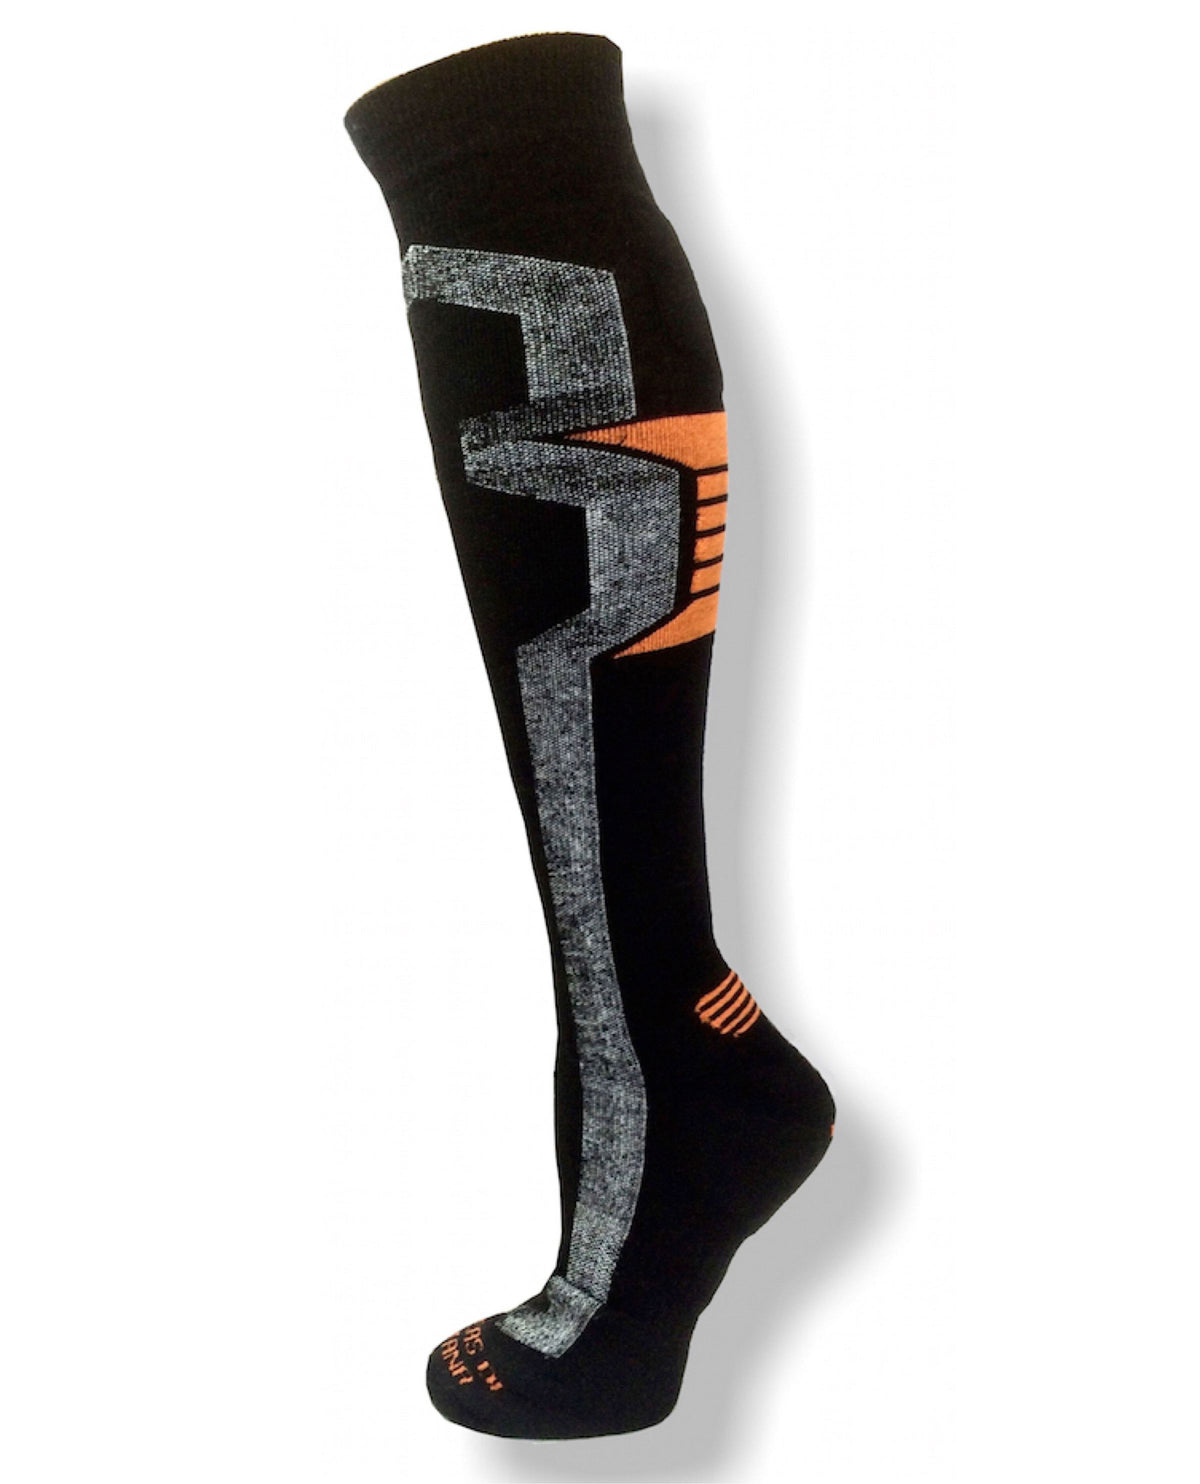 A product photo with a white background of a gray, orange, and black Alpacas of Montana cozy comfortable soft warm thermal winter freezing temperatures antimicrobial moisture wicking alpaca wool ski and snowboard socks for snowshoeing, skiing, snowboarding, ice fishing, outdoors.